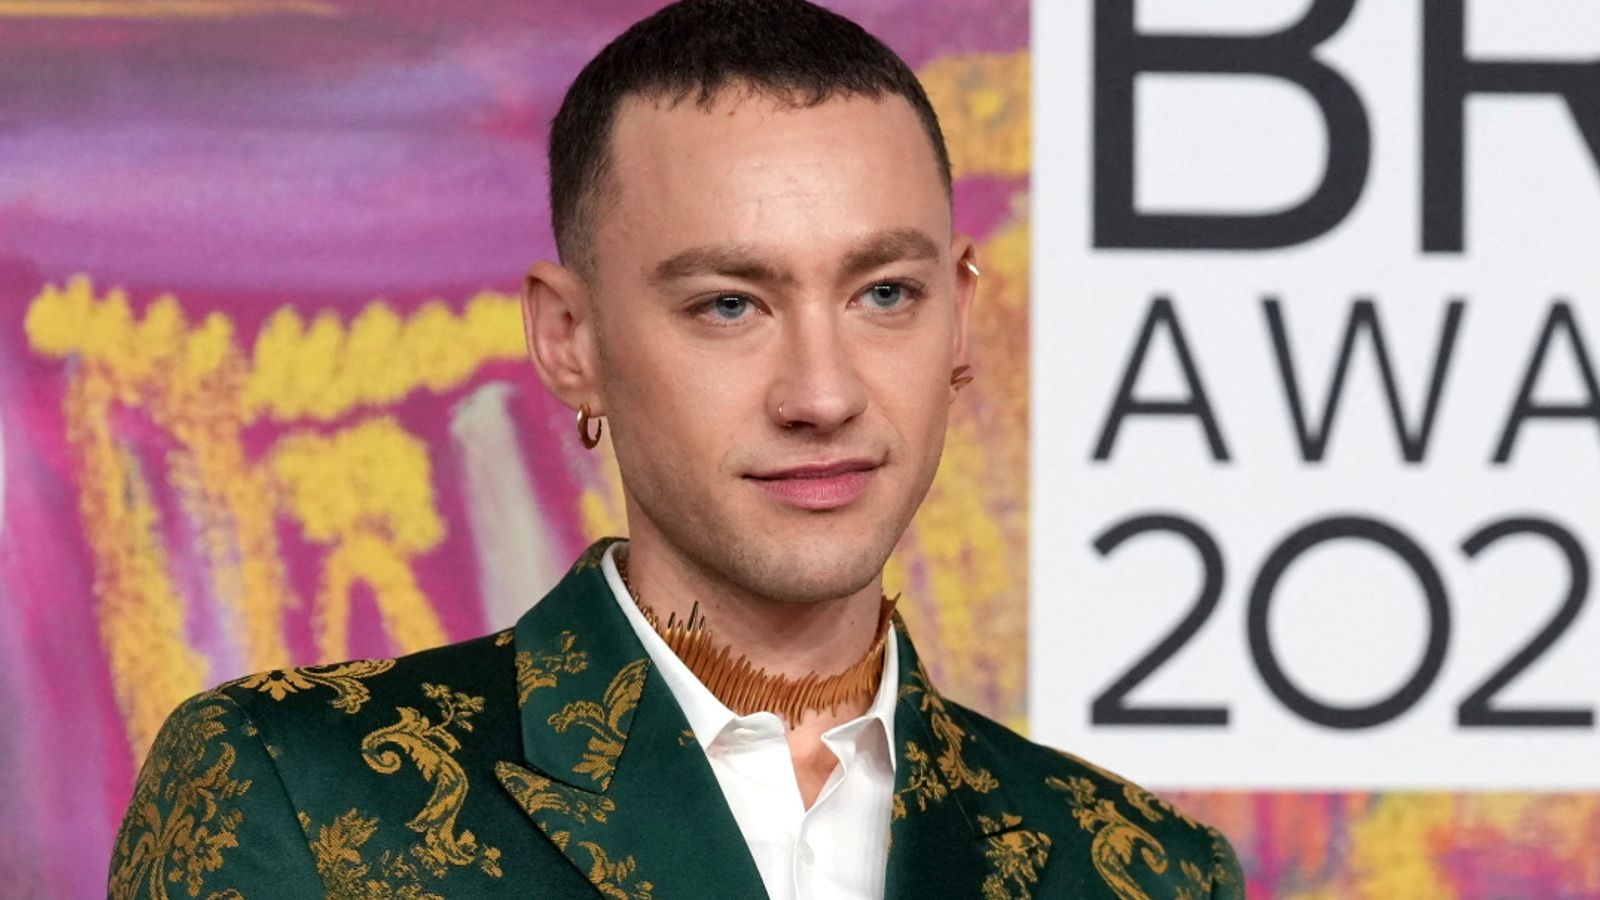 Olly Alexander addresses 'extreme' remarks from fans on Israel's Eurovision inclusion